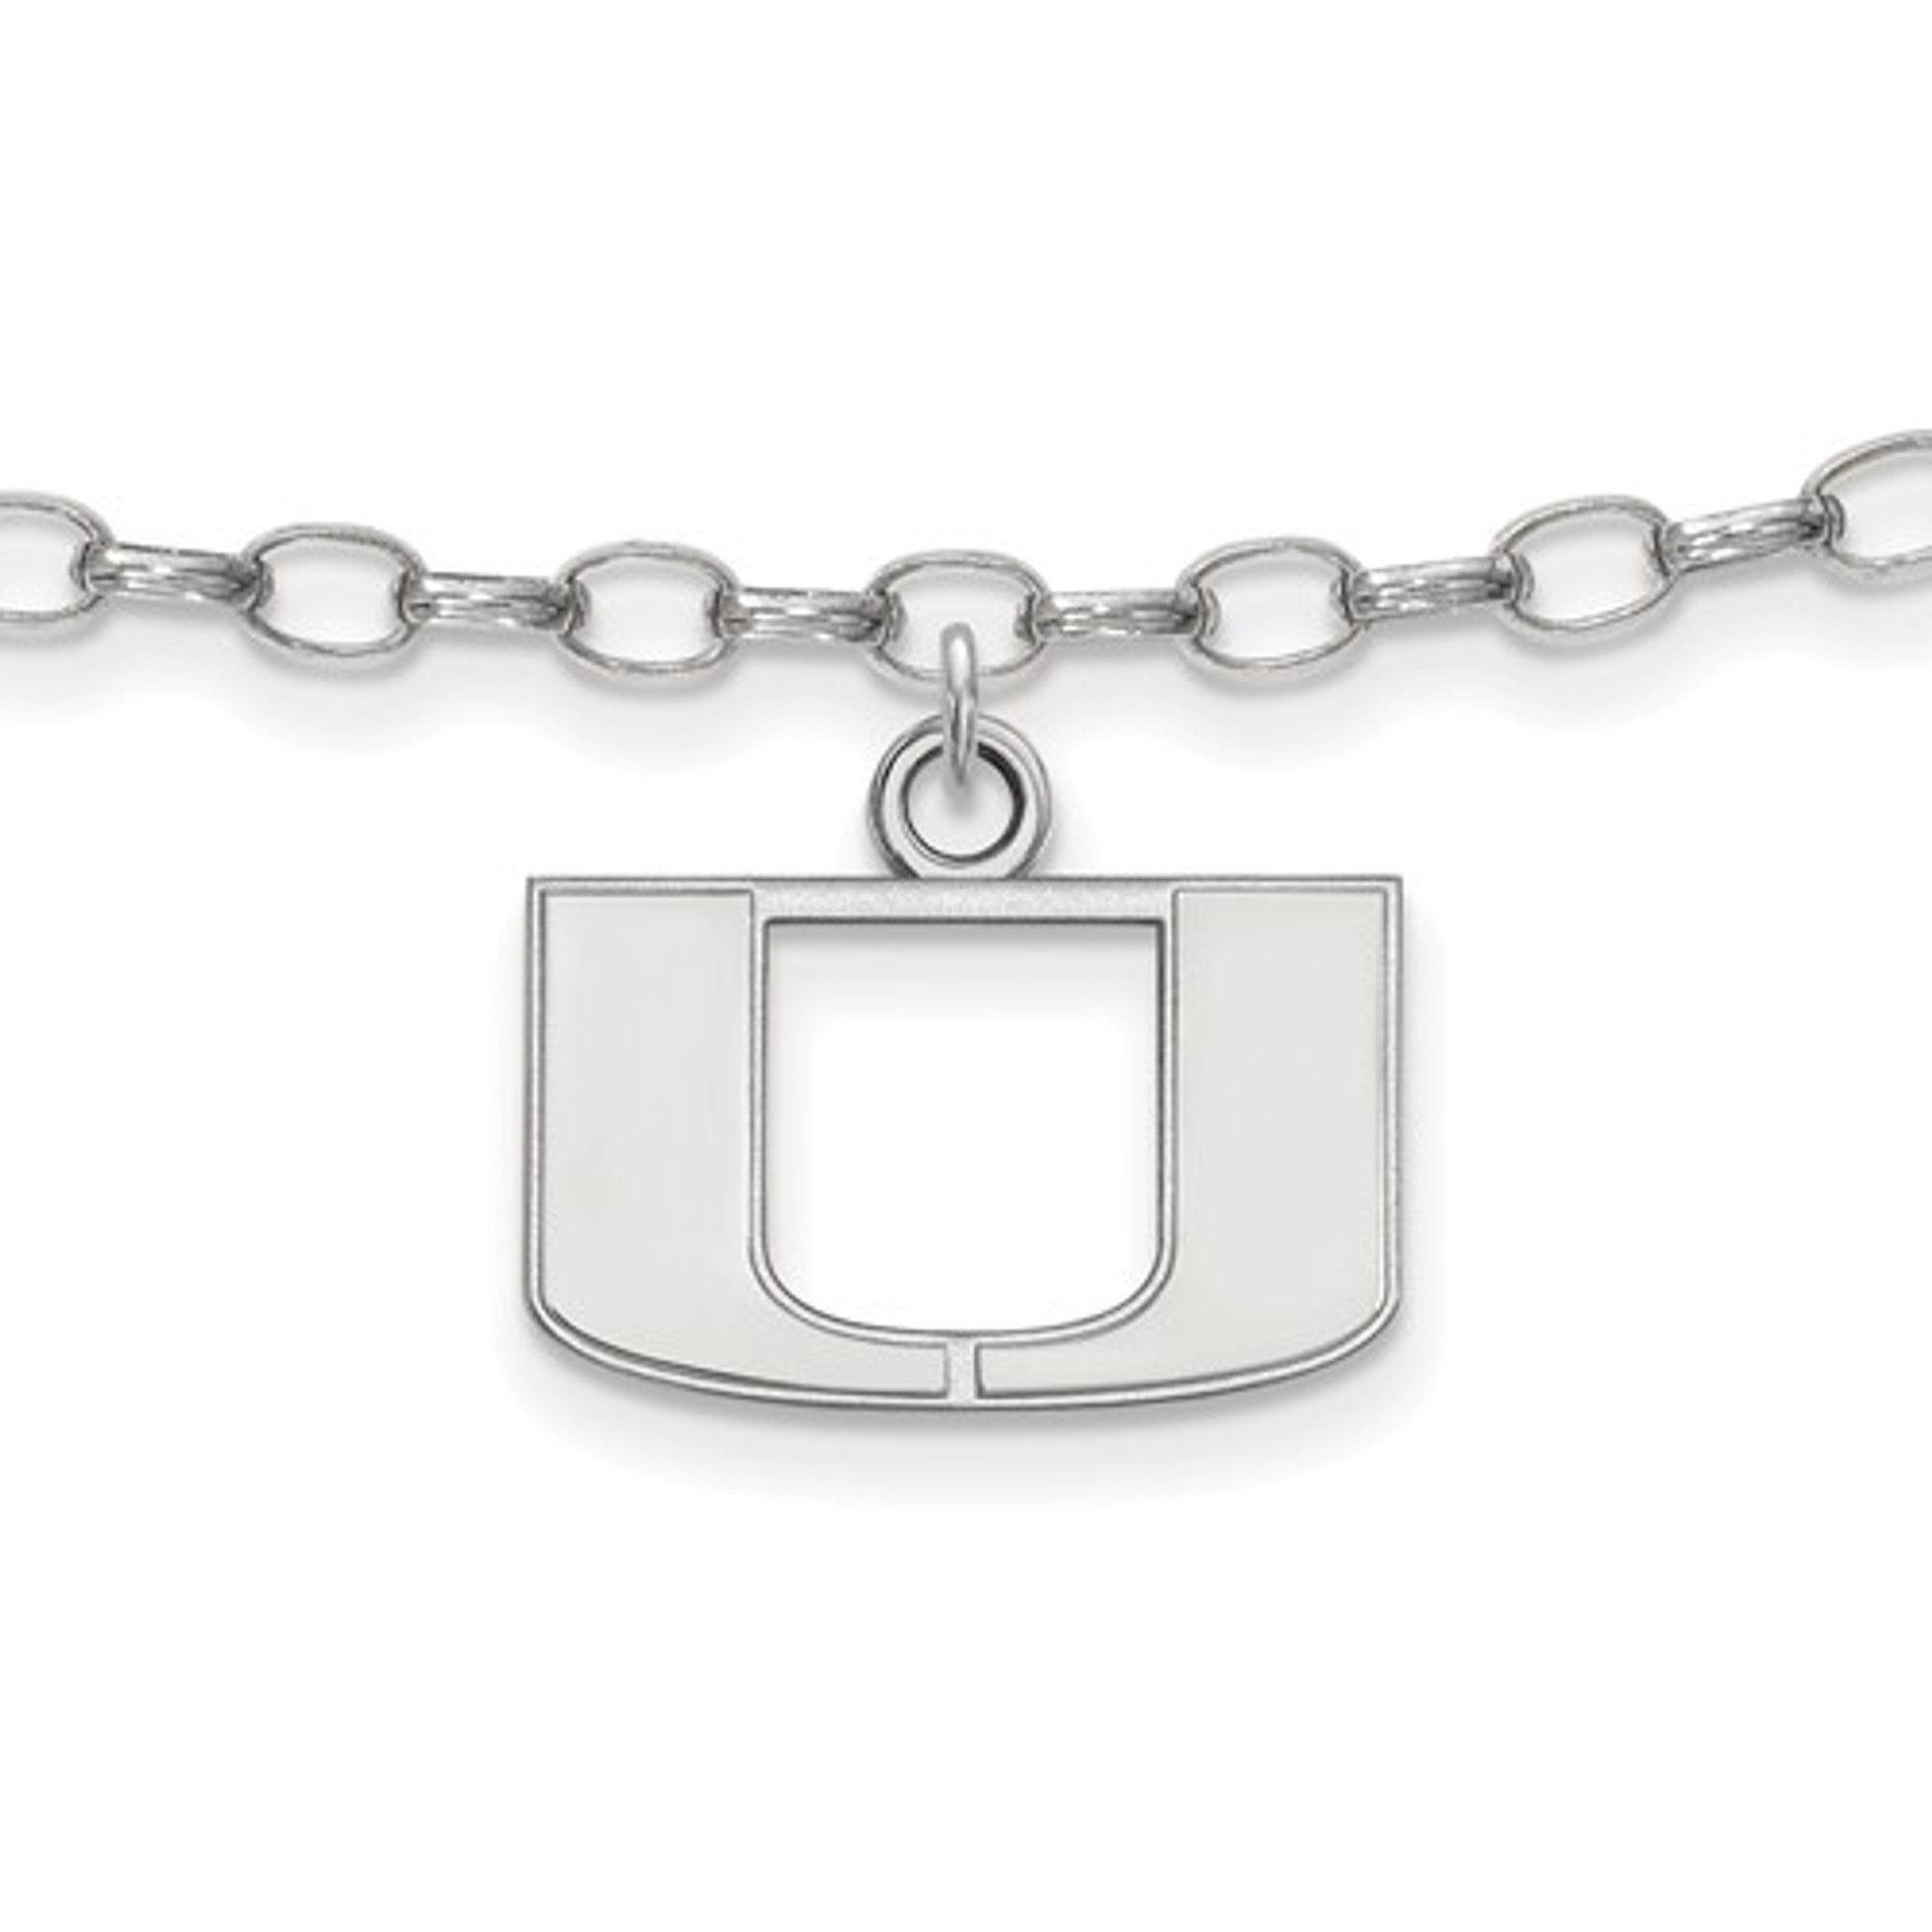 Gold-Plated Sterling Silver Miami University Anklet by LogoArt 